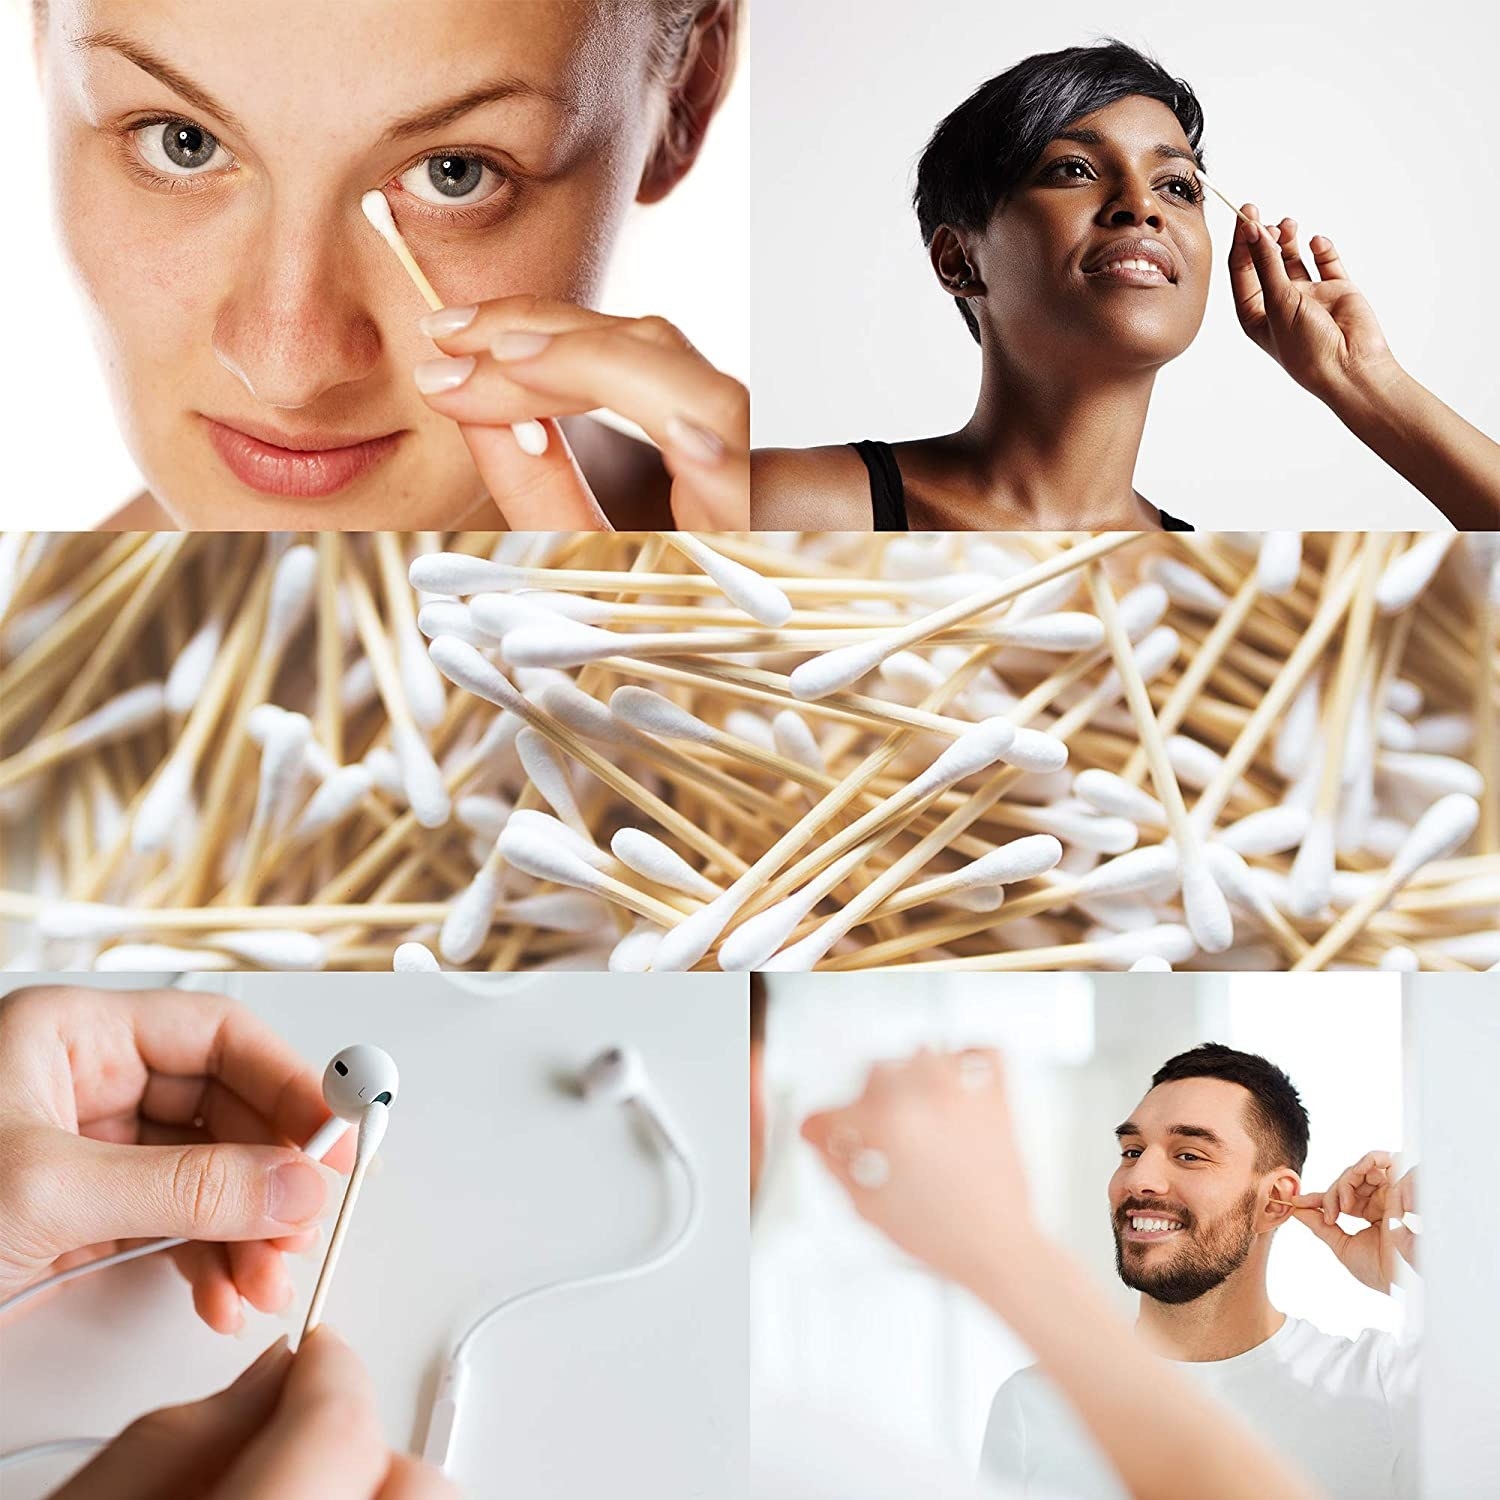 A collage showing the Q-tips and models using them to clean eyes, ears, and products